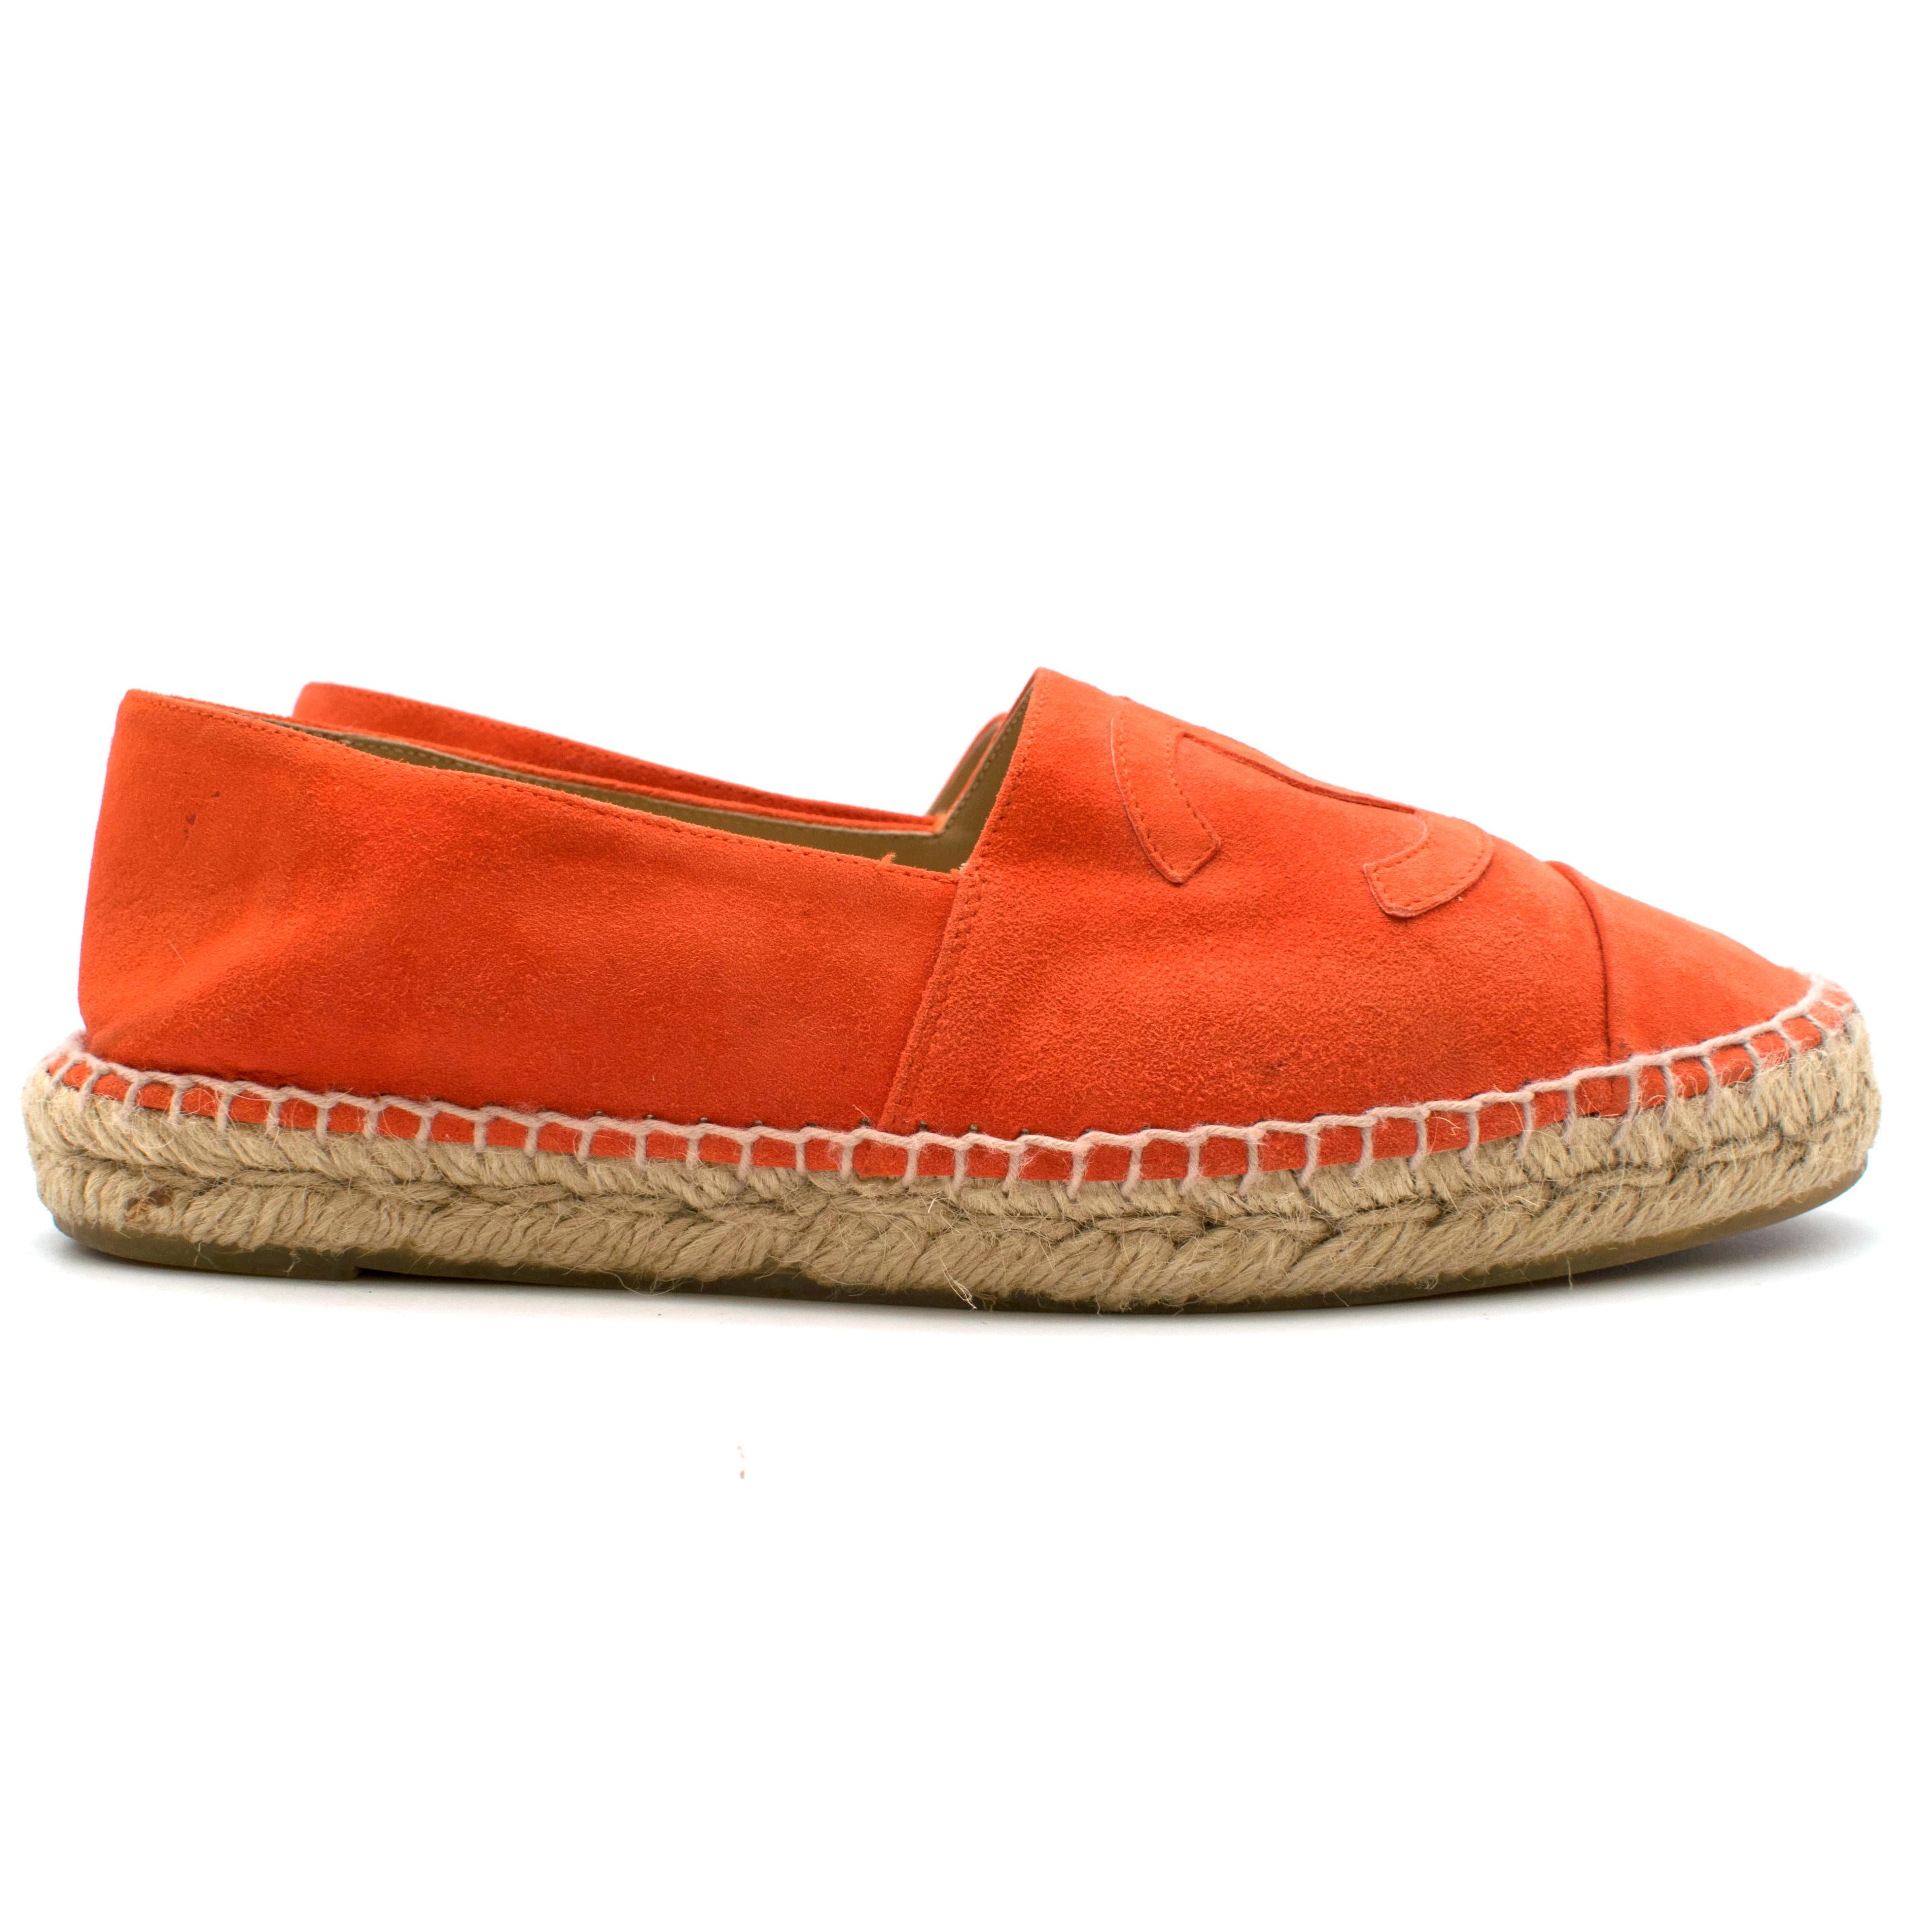 Chanel Coral Red Suede Espadrilles

- Suede flat espadrilles 
- Iconic Chanel applique logo on front of the shoe

Material
- Suede outer
- Leather insole
- Rubber sole

Made in Spain

Please note, these items are pre-owned and may show signs of